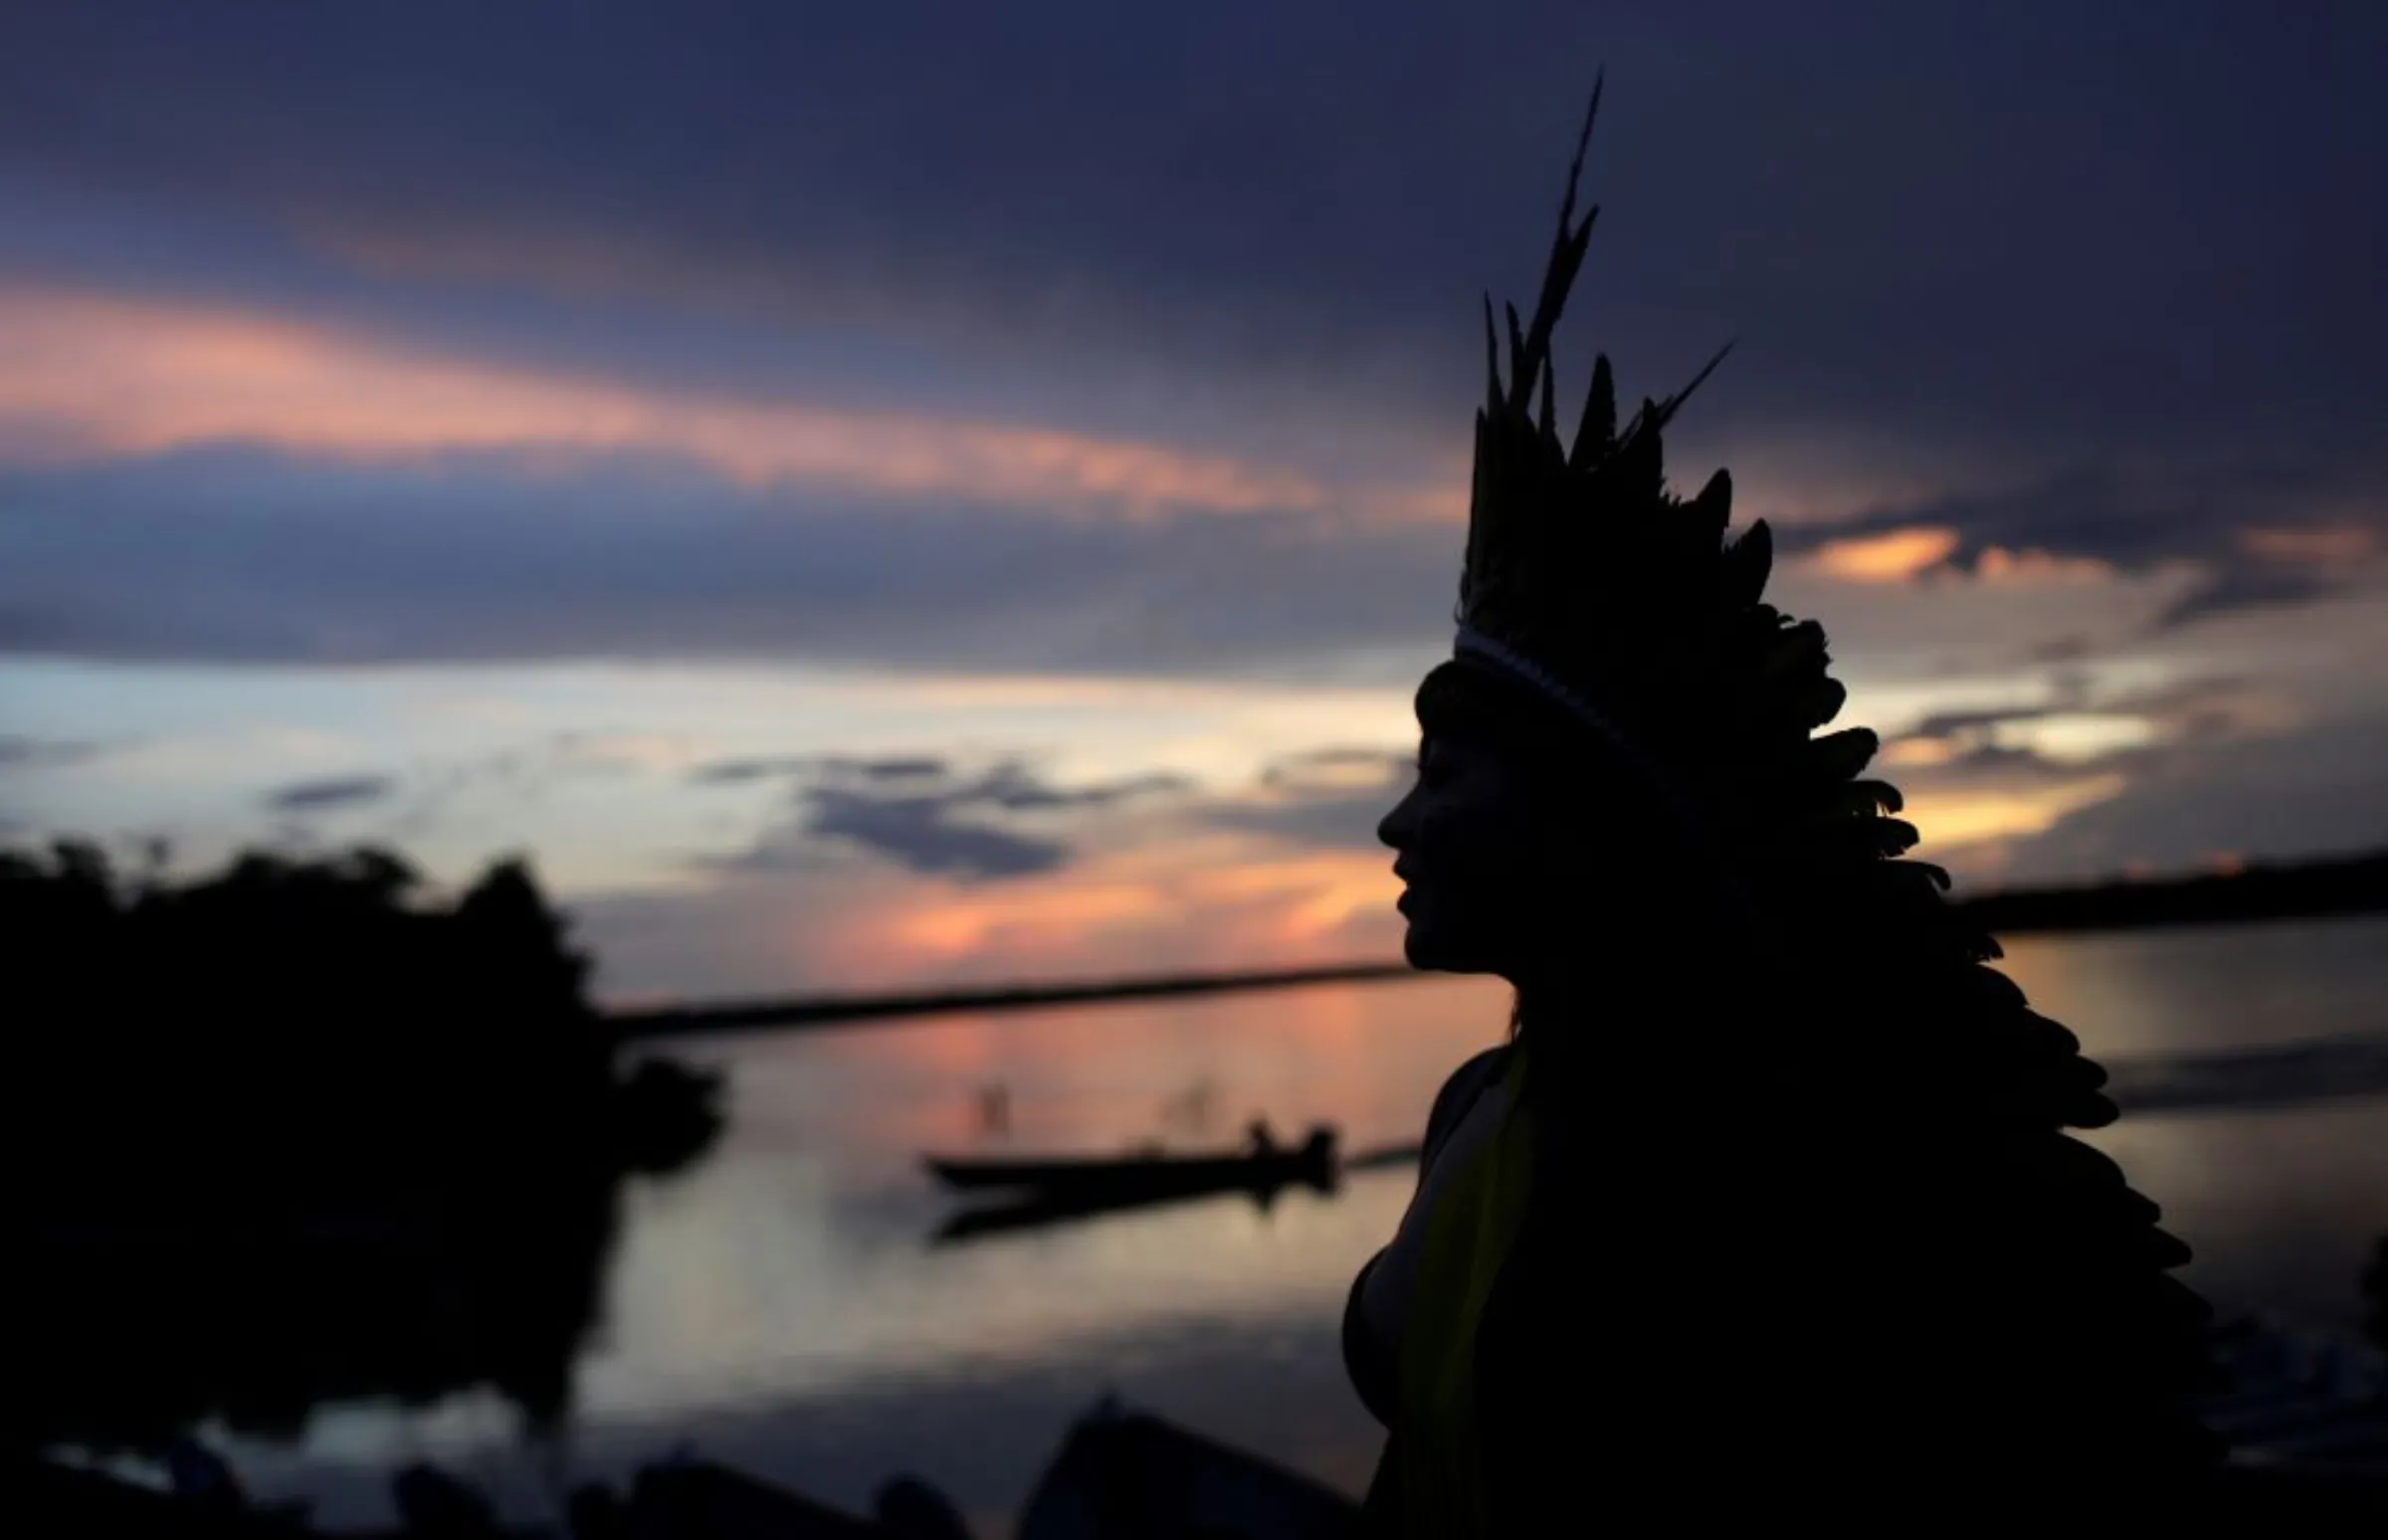 Indigenous leader of the Celia Xakriaba tribe walks next to the Xingu River during a four-day pow wow in Piaracu village, in Xingu Indigenous Park, near Sao Jose do Xingu, Mato Grosso state, Brazil, January 15, 2020. REUTERS/Ricardo Moraes